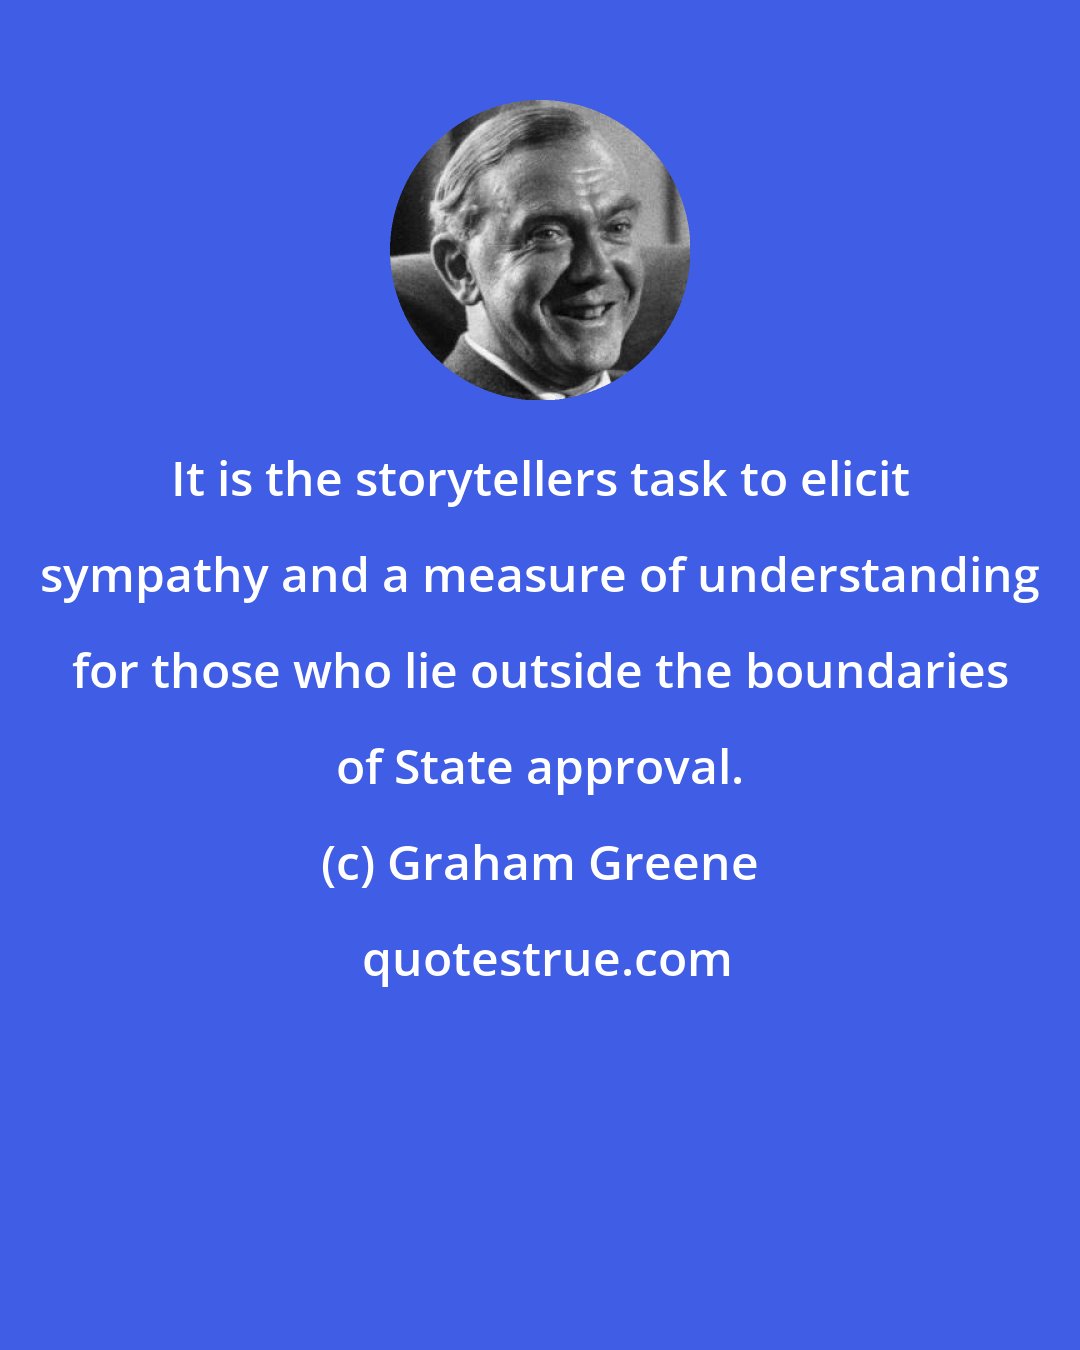 Graham Greene: It is the storytellers task to elicit sympathy and a measure of understanding for those who lie outside the boundaries of State approval.